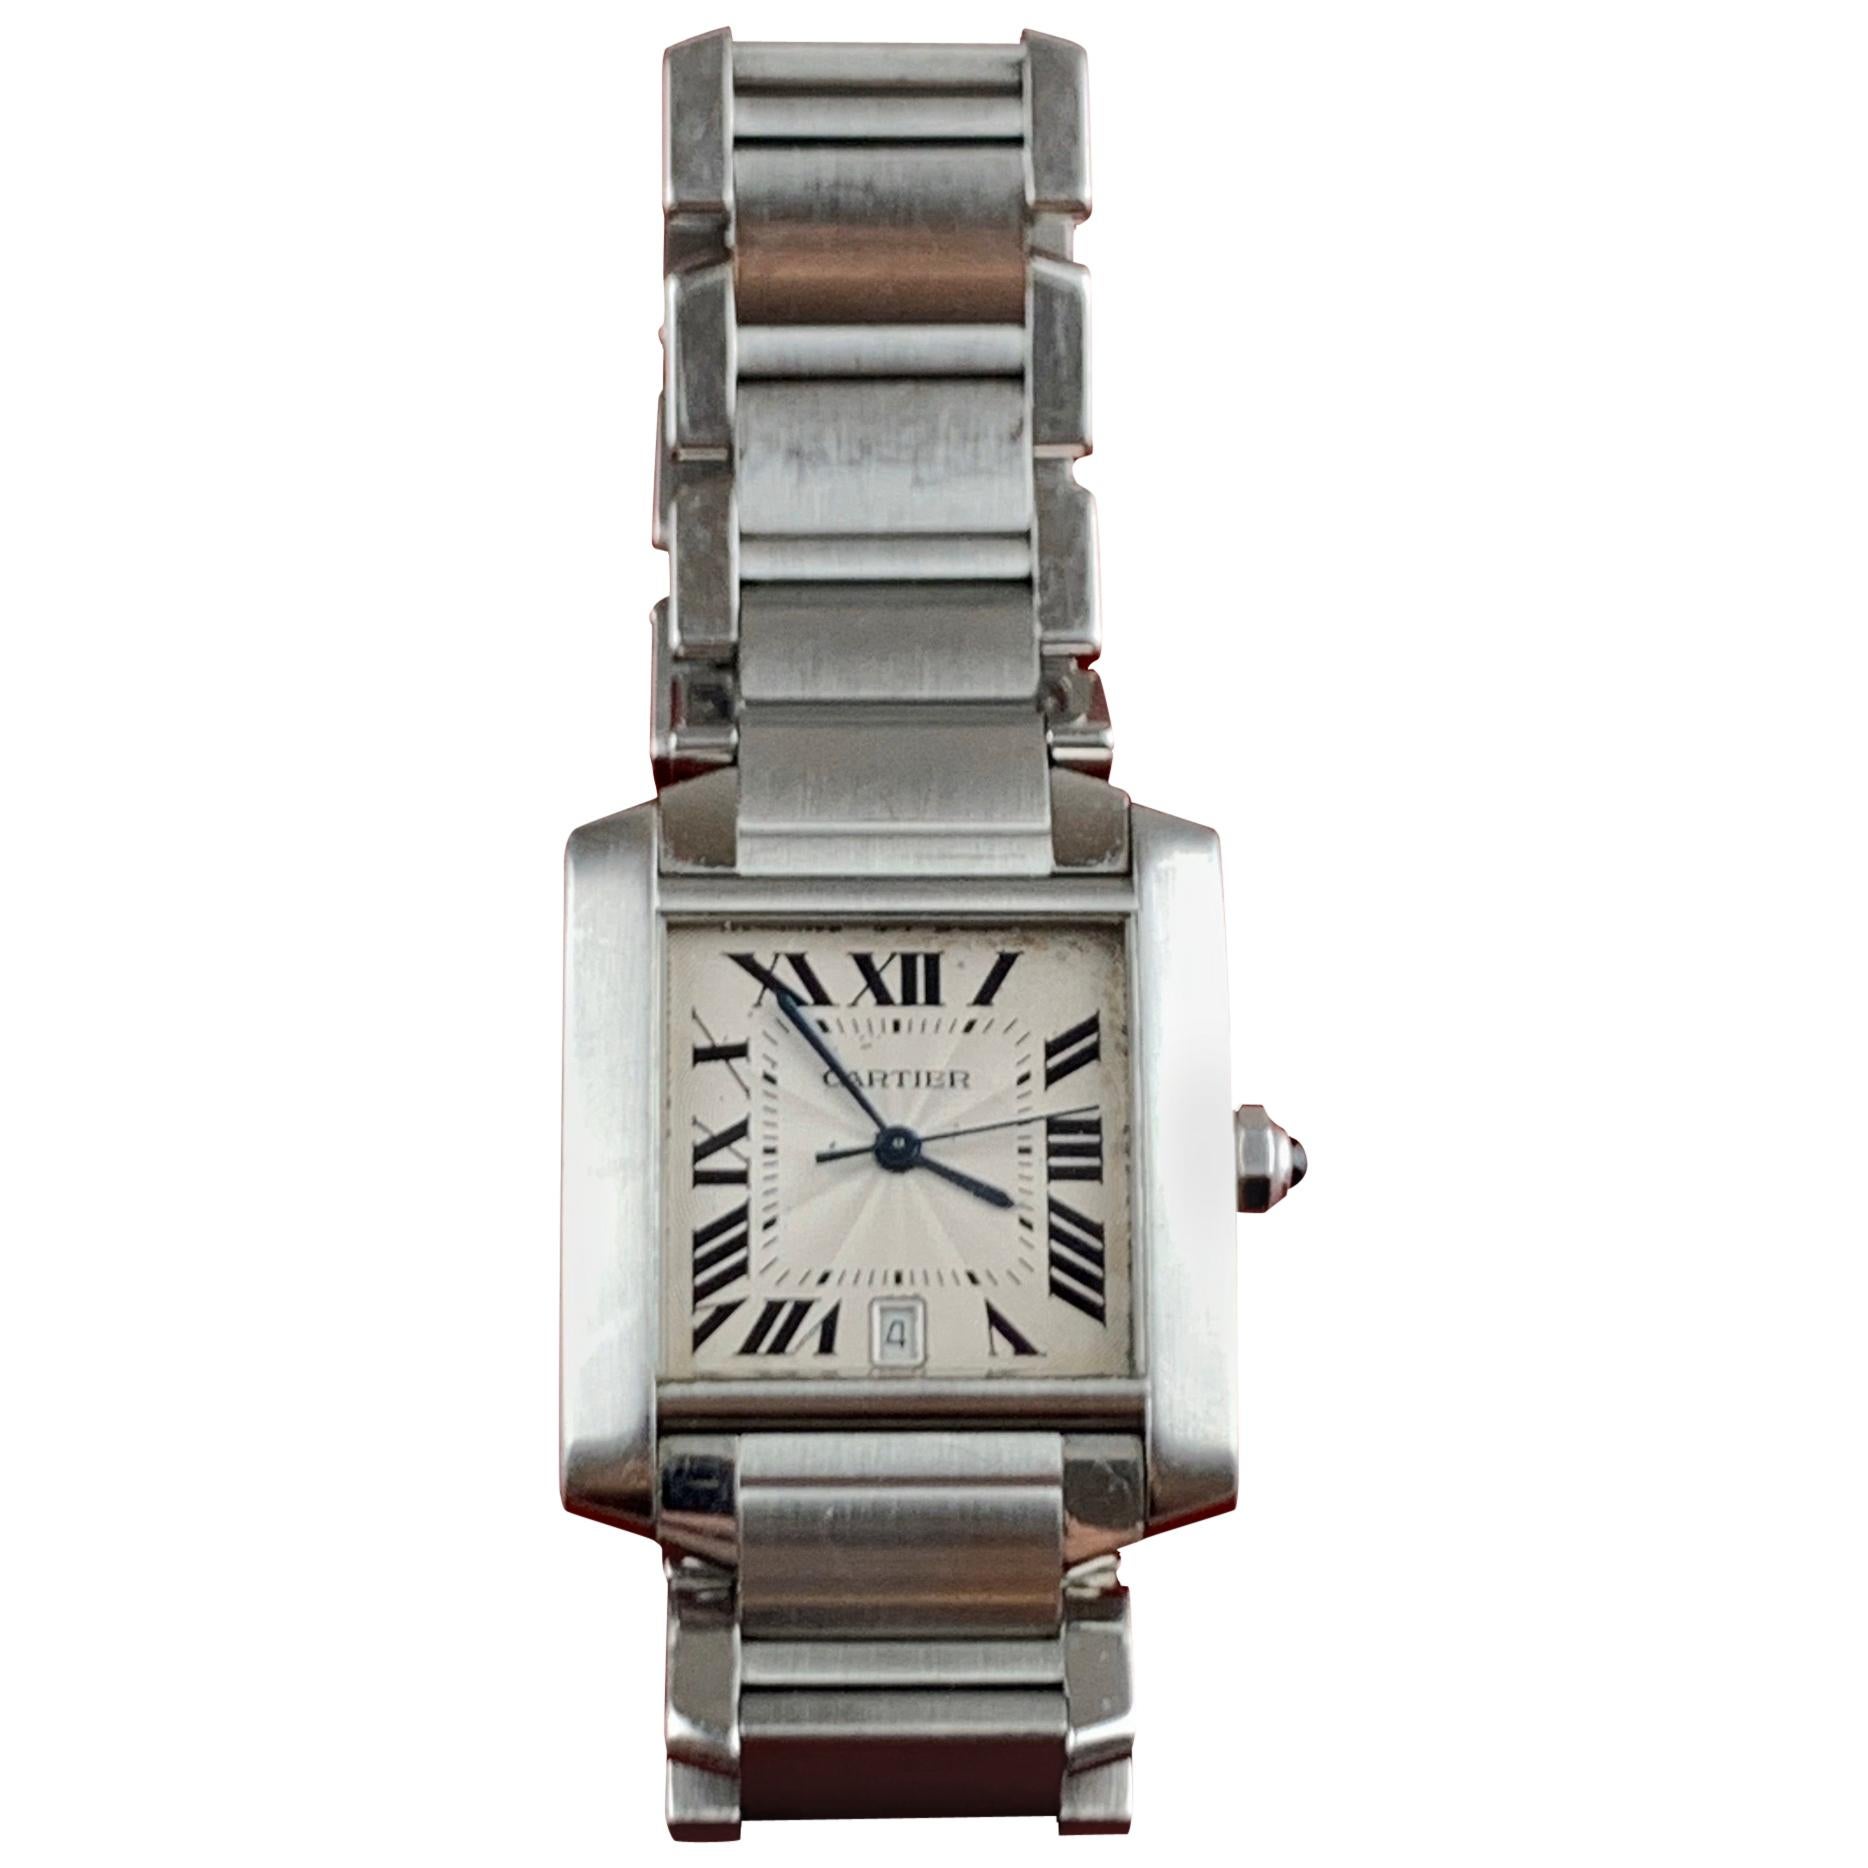 Cartier Tank Francaise Stainless Steel 2302 Watch